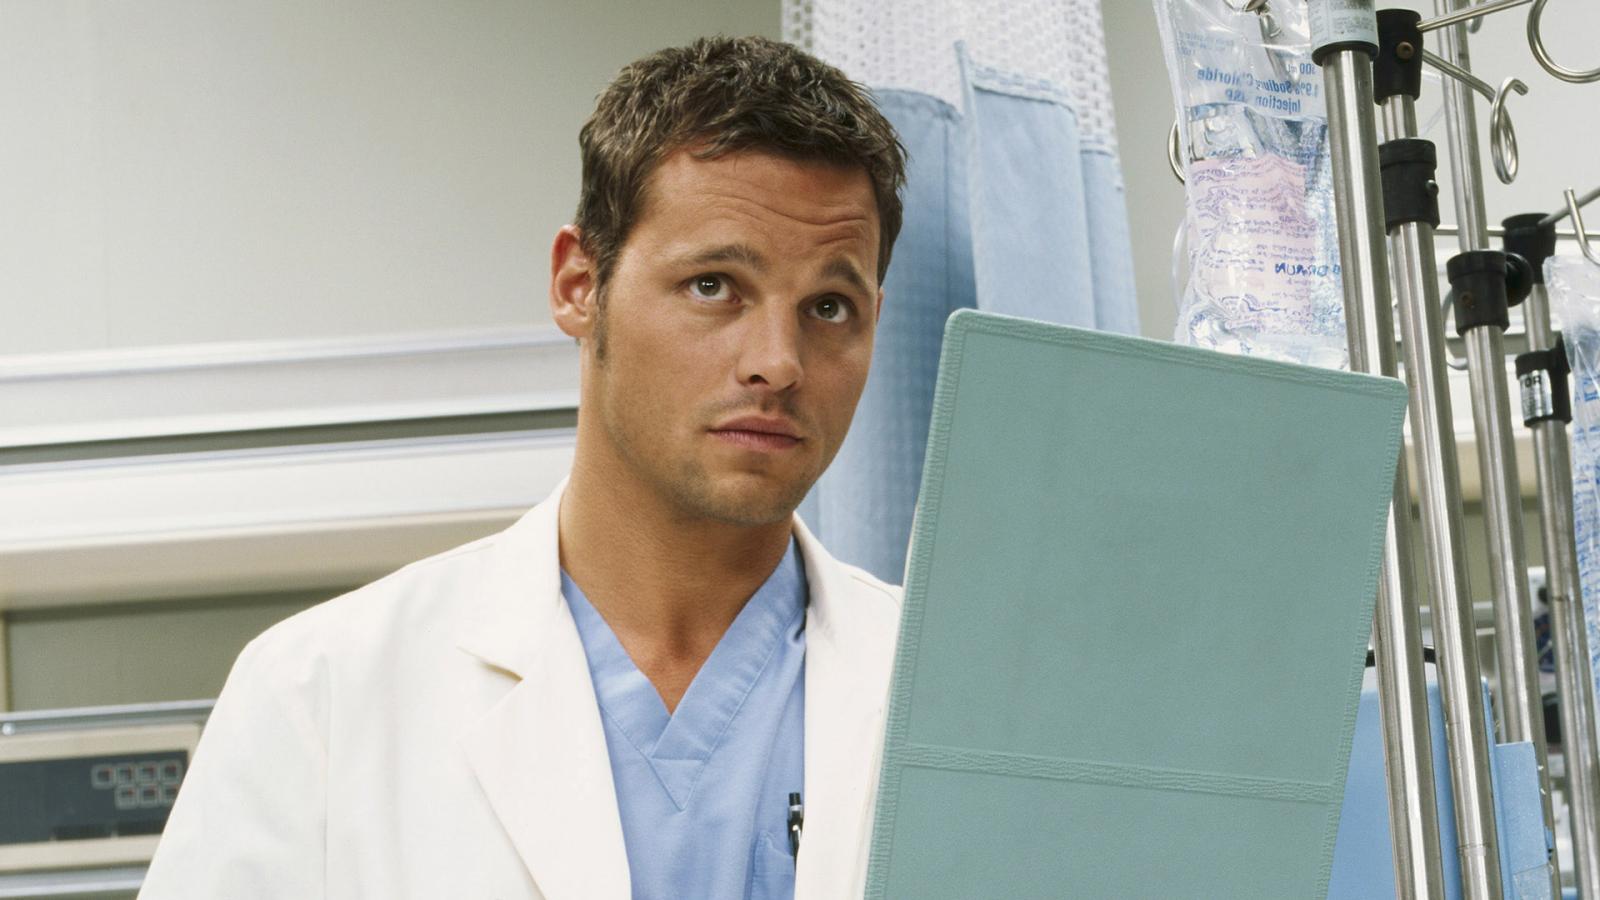 Which Grey's Anatomy Doctor Are You, Based on Your Zodiac Sign? - image 9